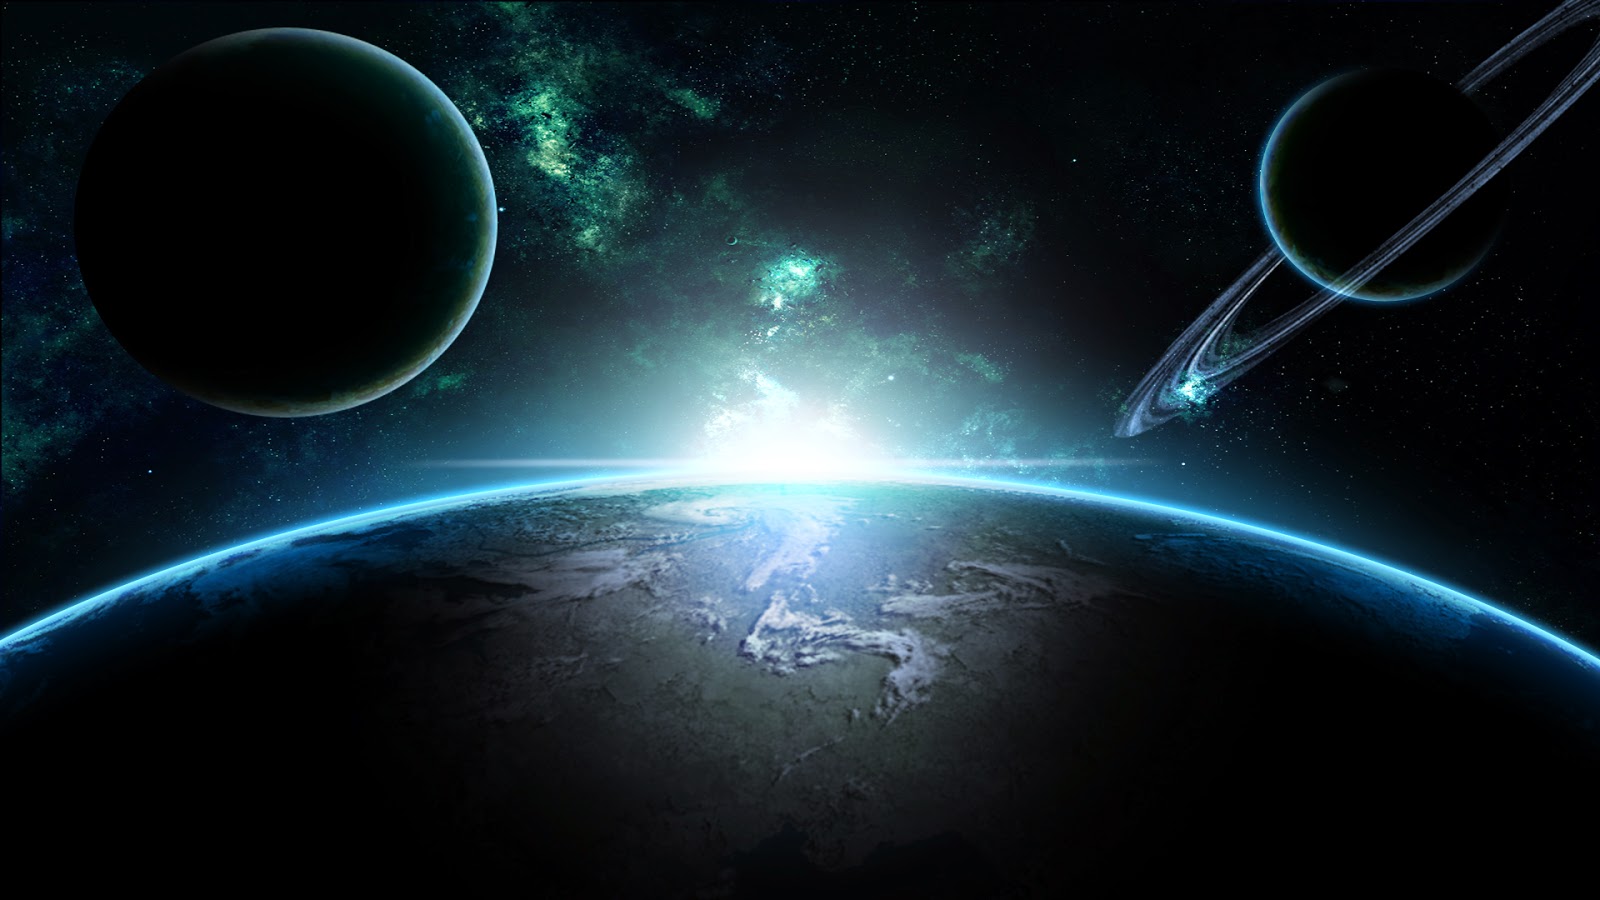 dünya wallpaper,outer space,atmosphere,planet,astronomical object,universe